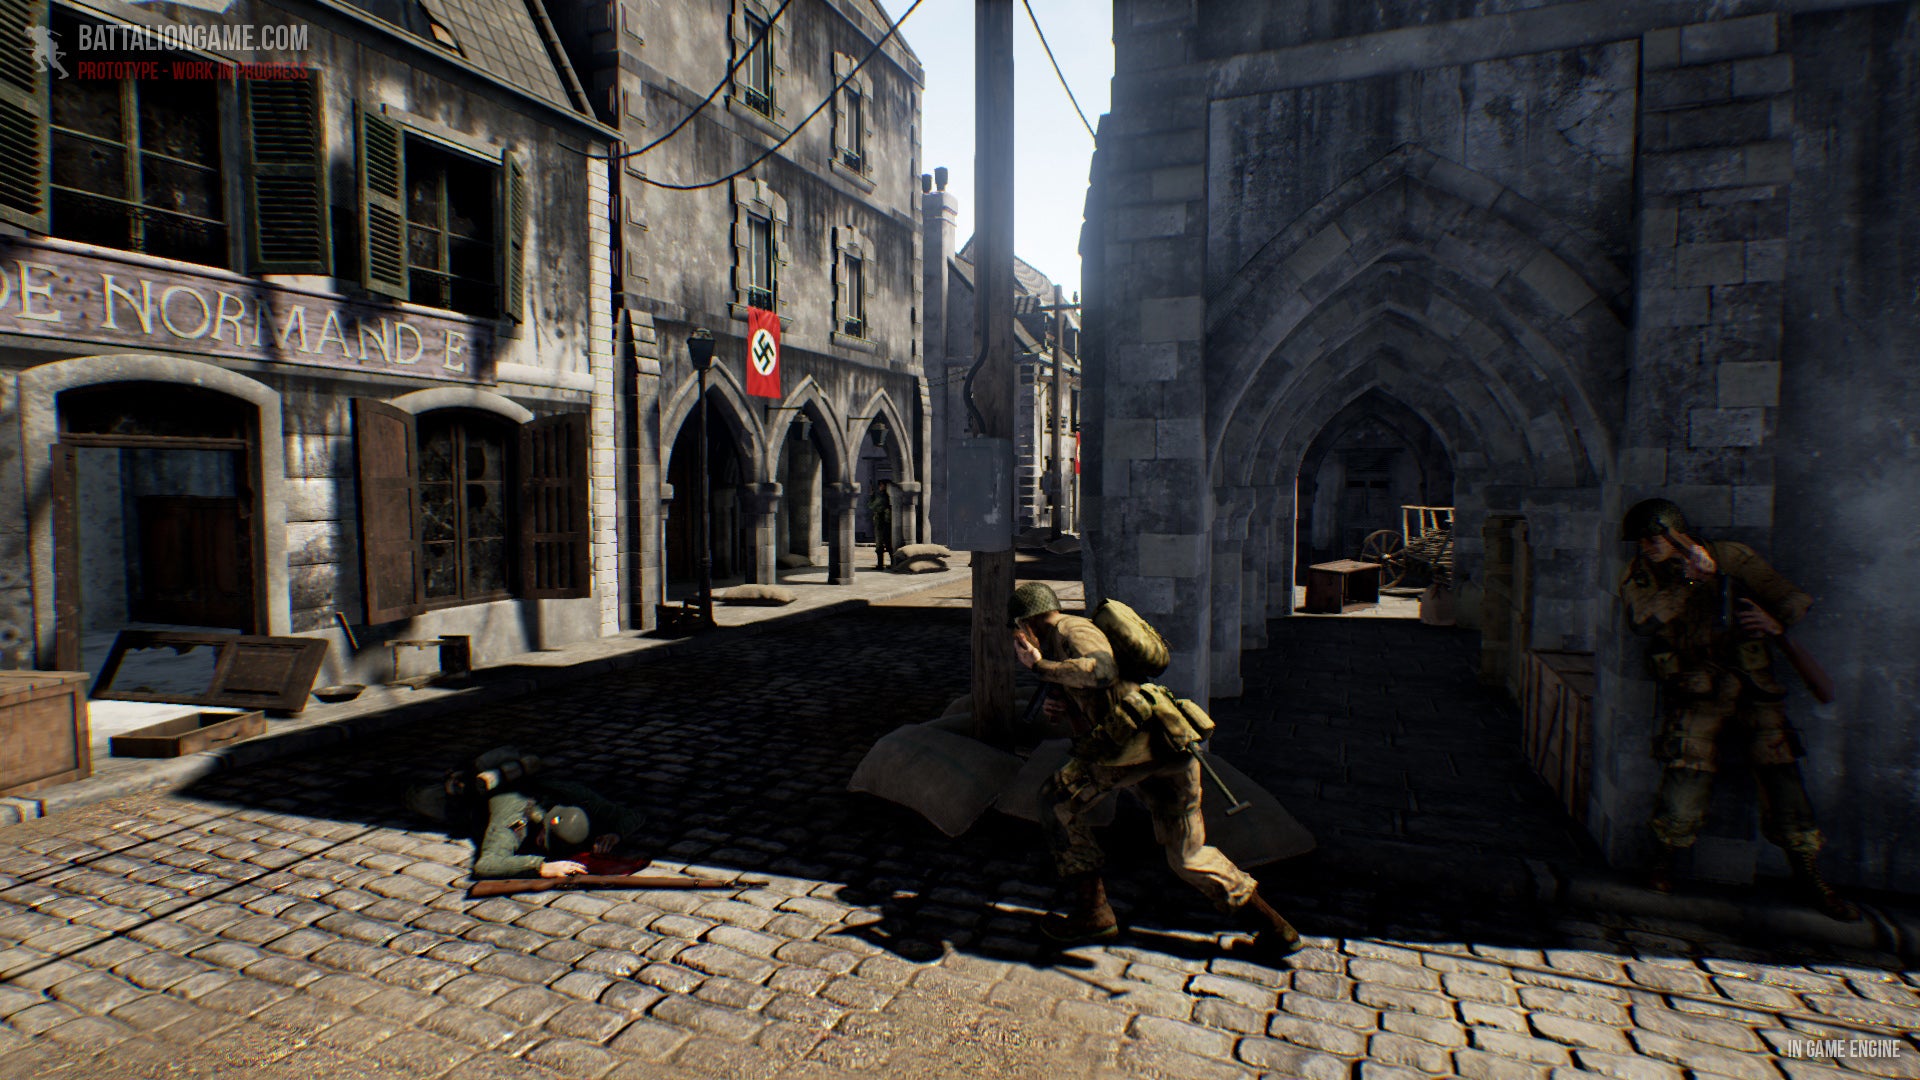 Image for Battalion 1944 reaches funding goal with 27 days left, stretch goals coming soon